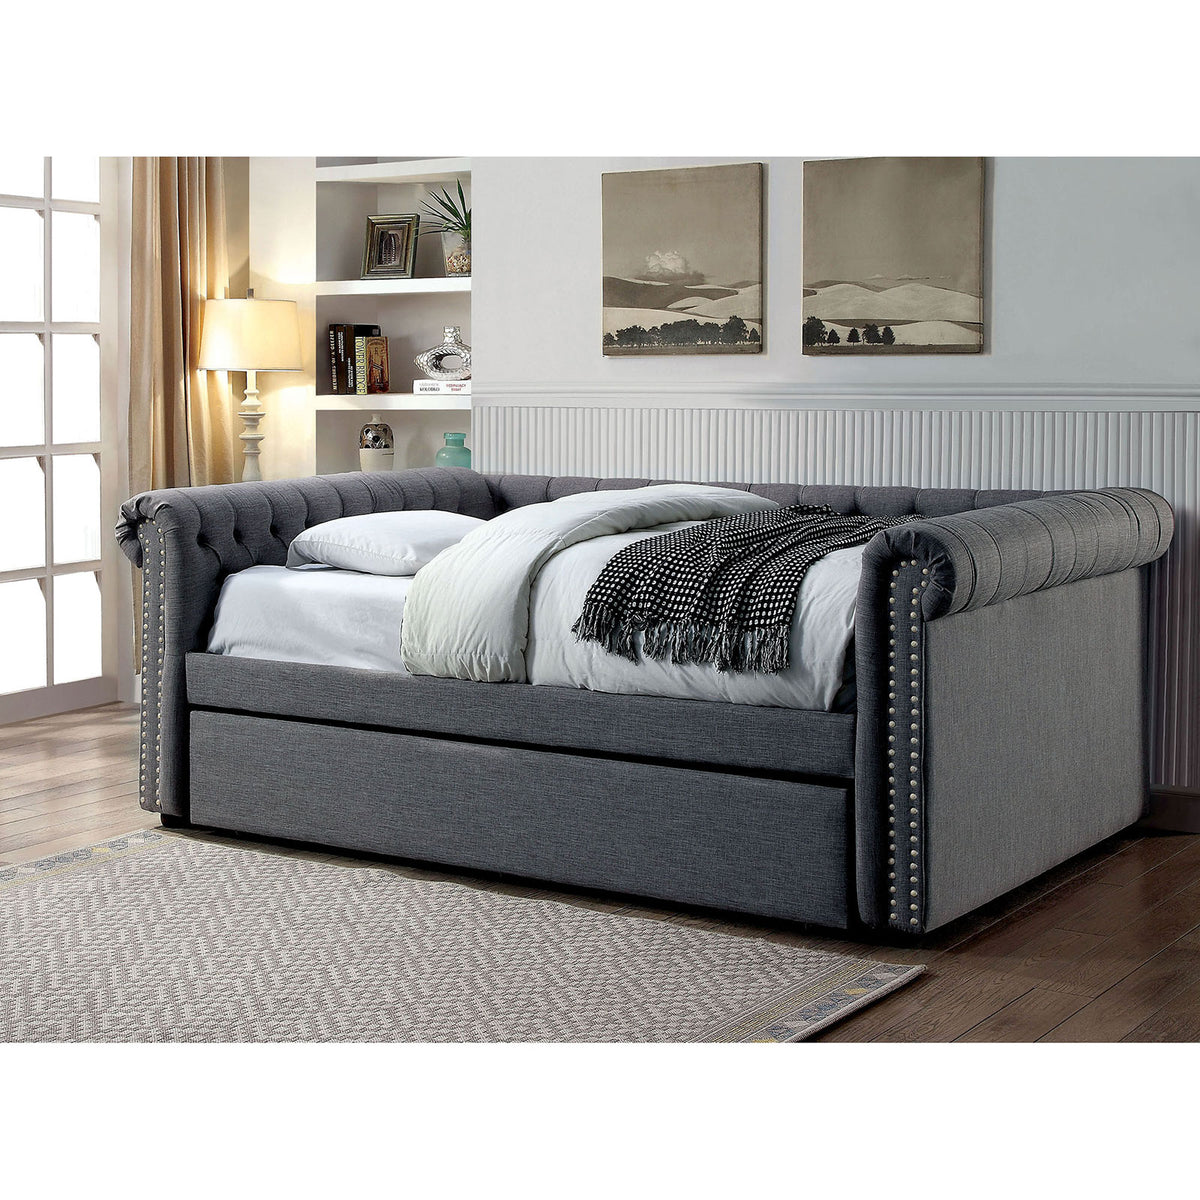 LEANNA Gray Full Daybed w/ Trundle, Gray - Half Price Furniture